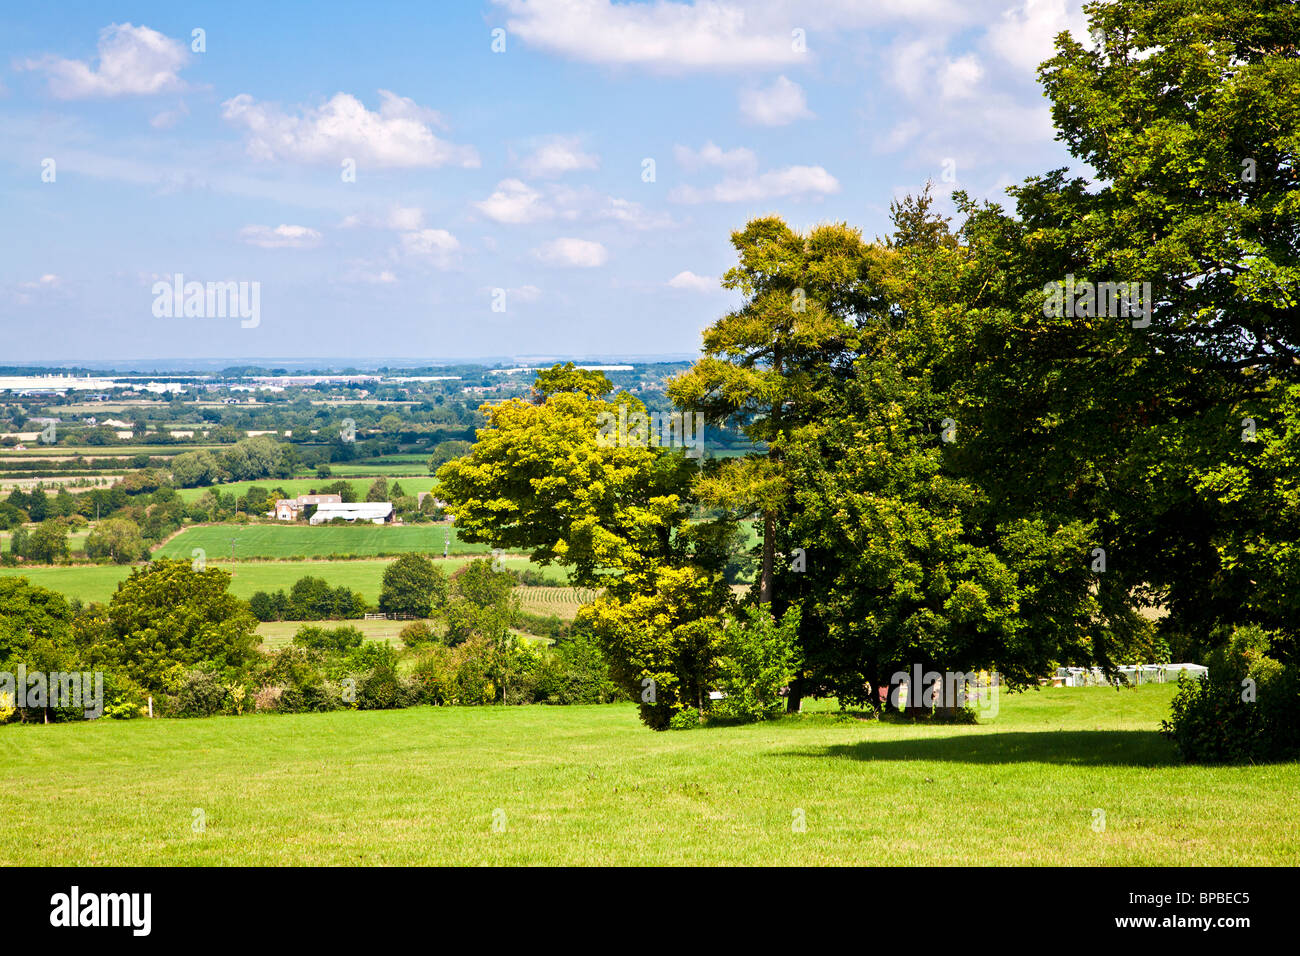 View from Upper Wanborough towards Swindon in Wiltshire, England, UK Stock Photo